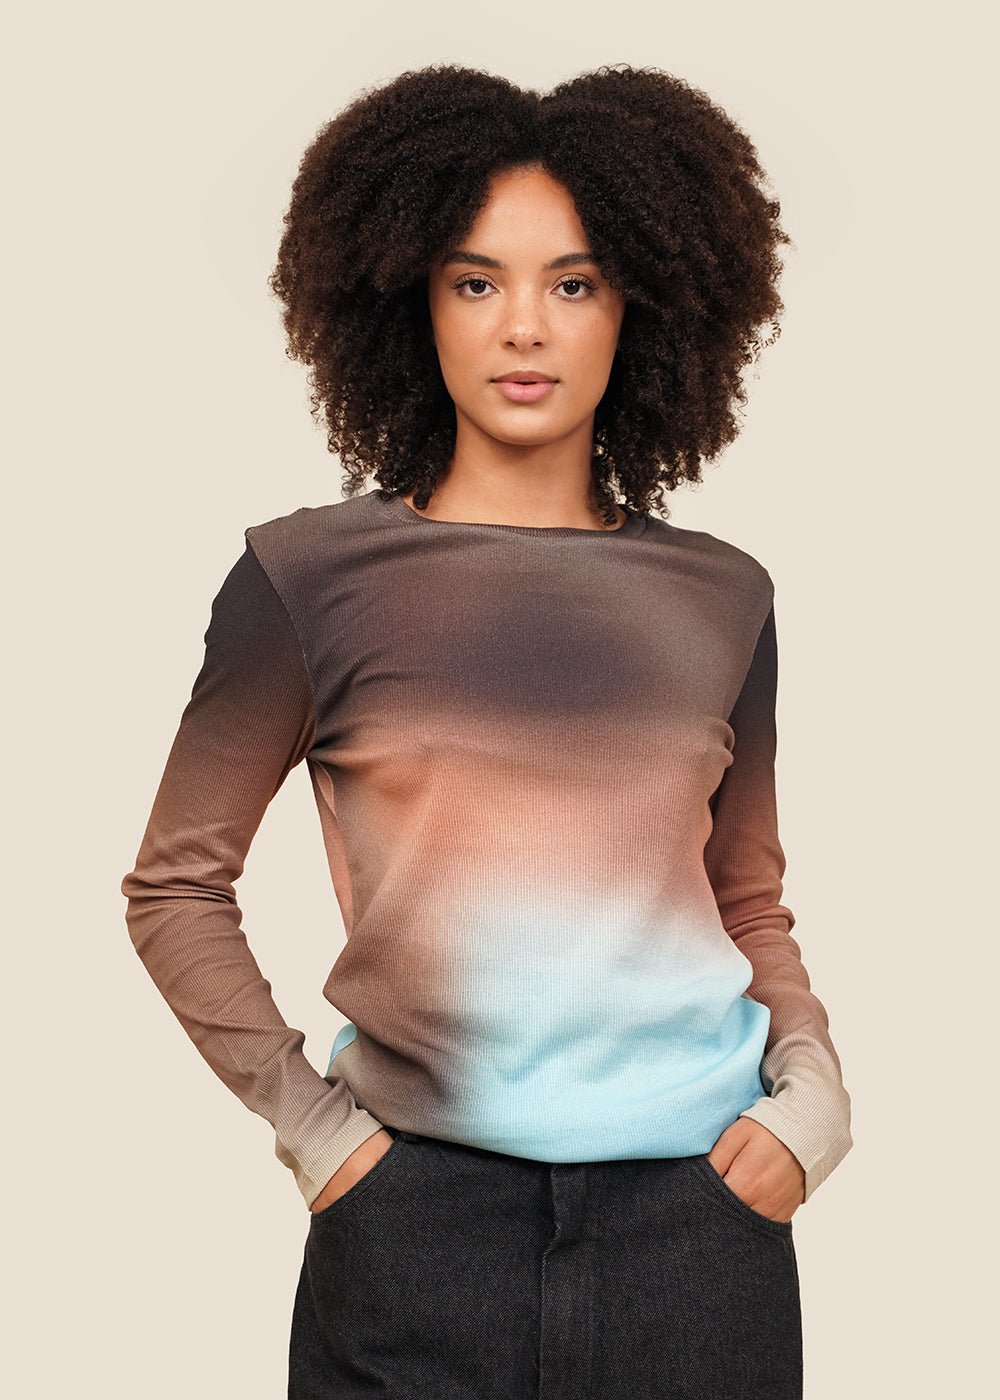 Paloma Wool Pausito Top - New Classics Studios Sustainable Ethical Fashion Canada